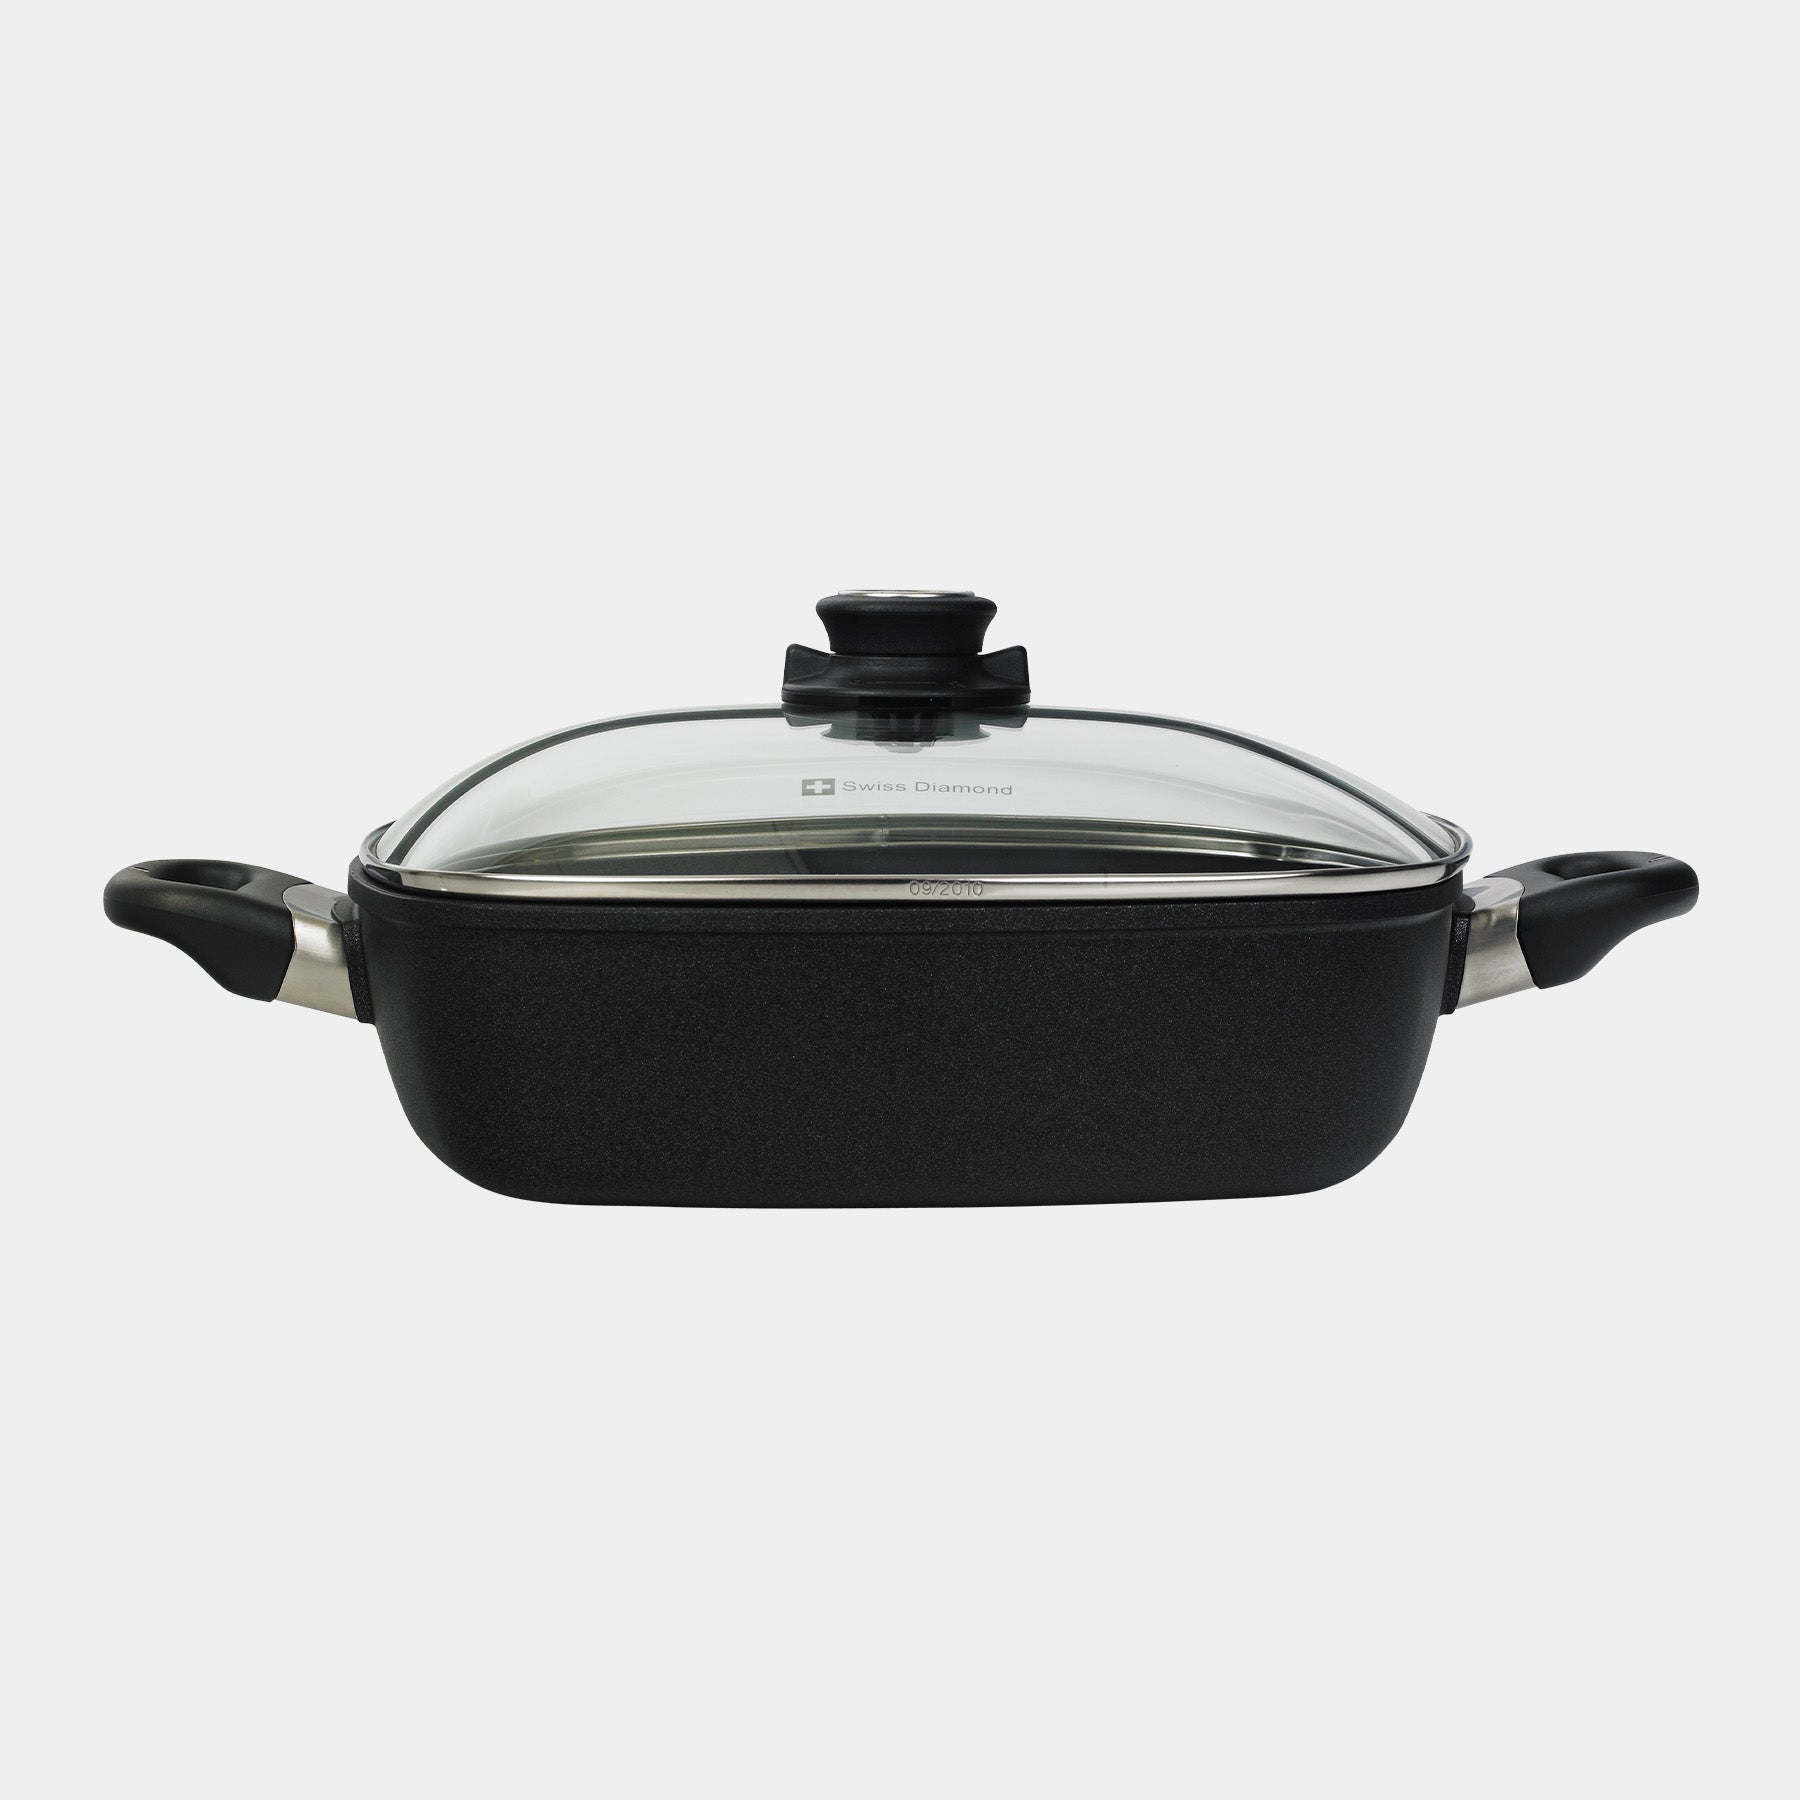 XD Nonstick 5 qt Square Casserole with Glass Lid Side View